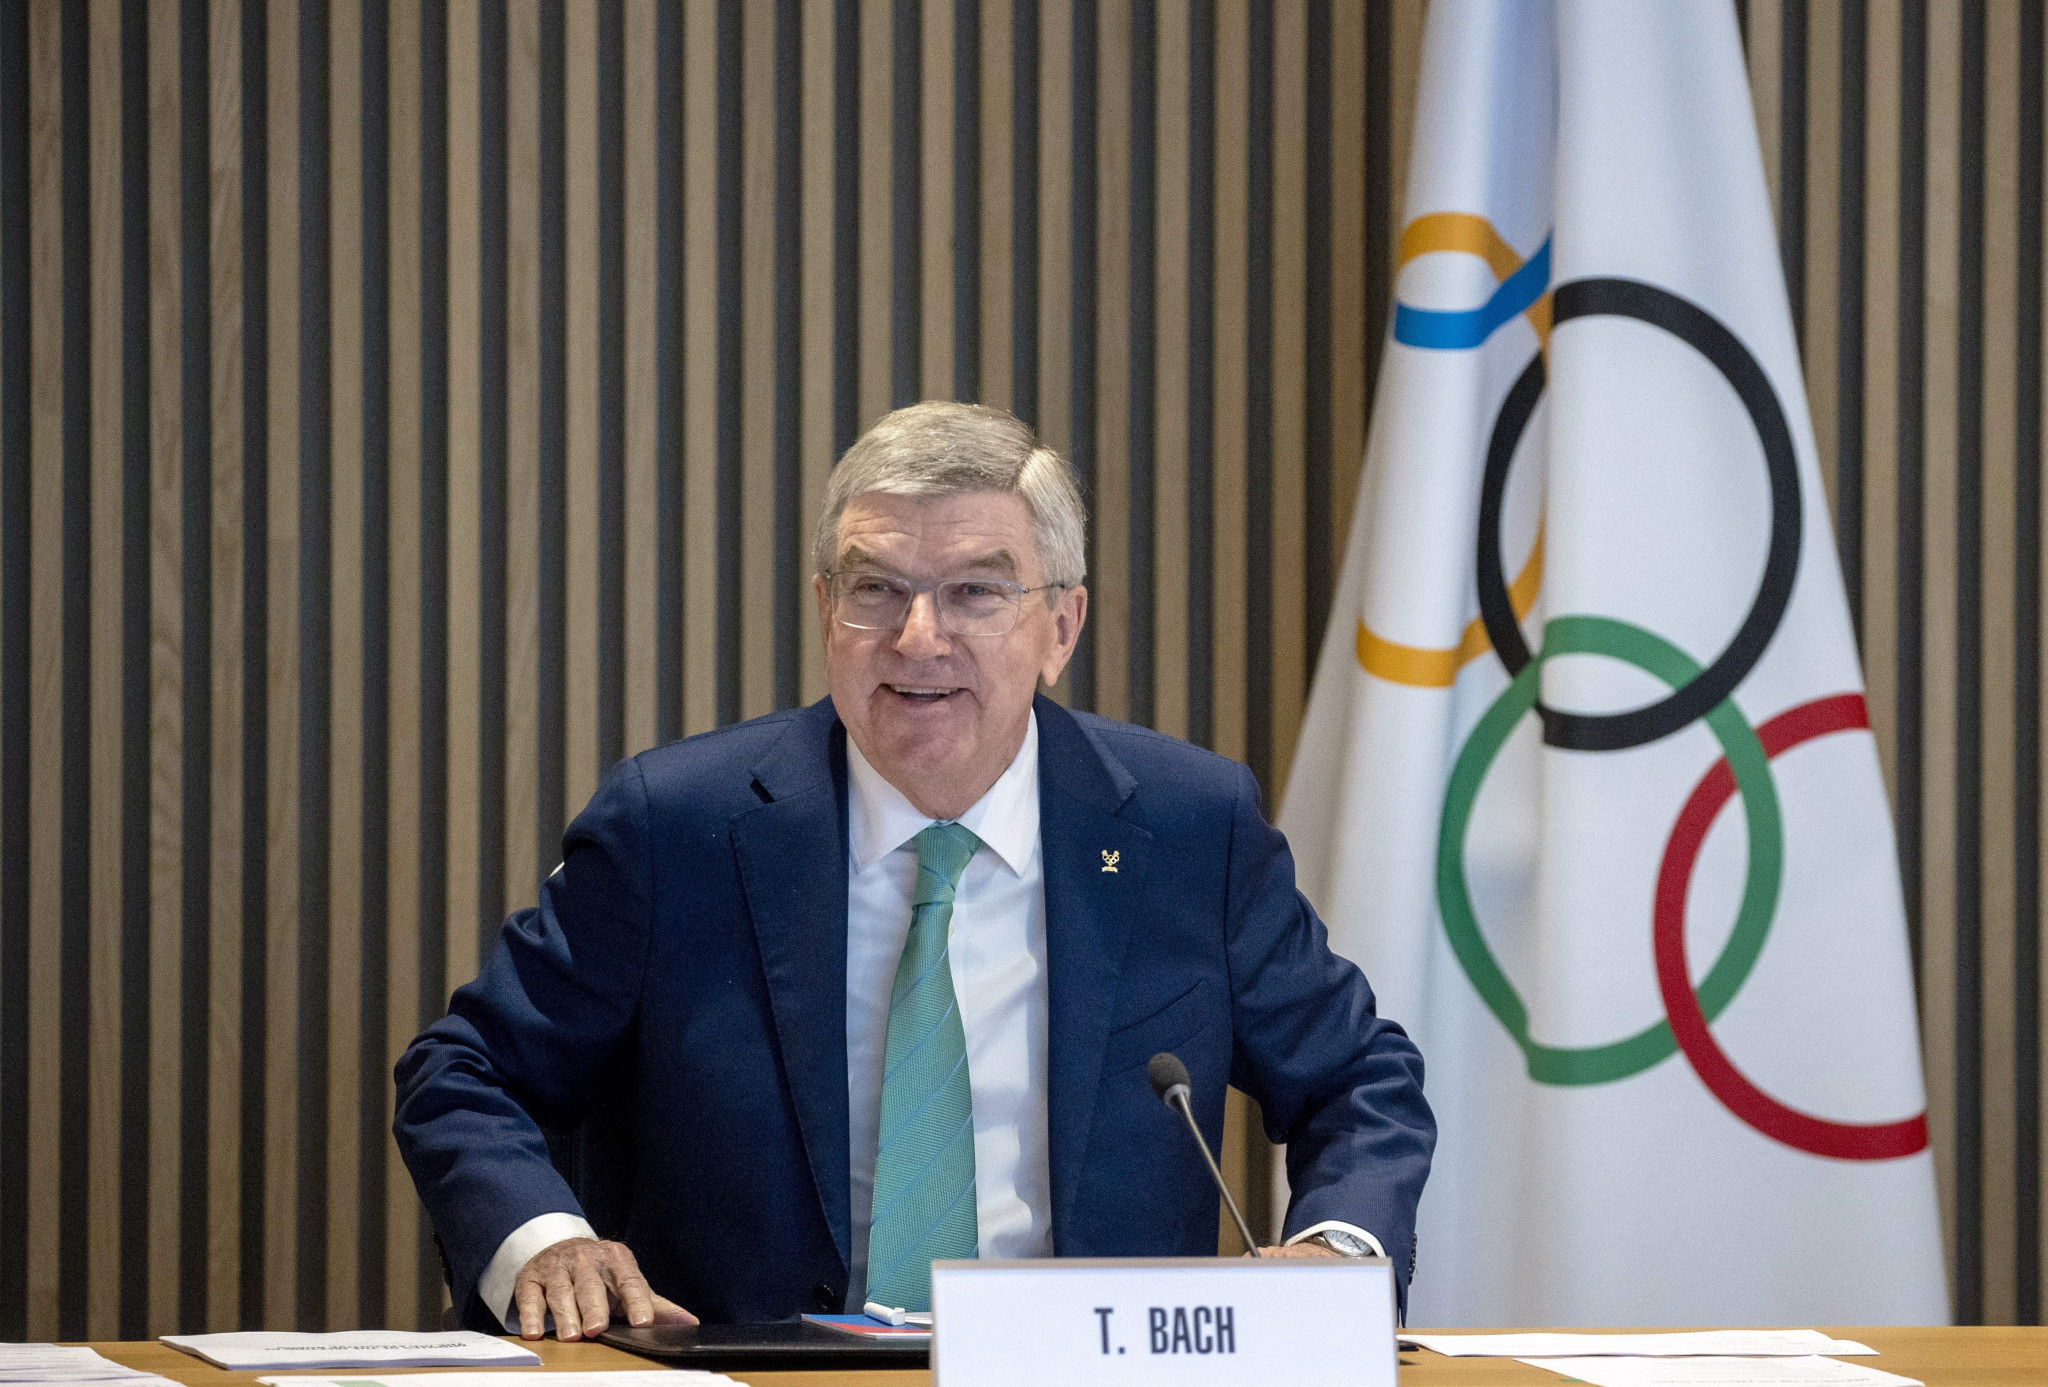 Bach warns Ukraine against boycotting Paris 2024 in letter to NOC President